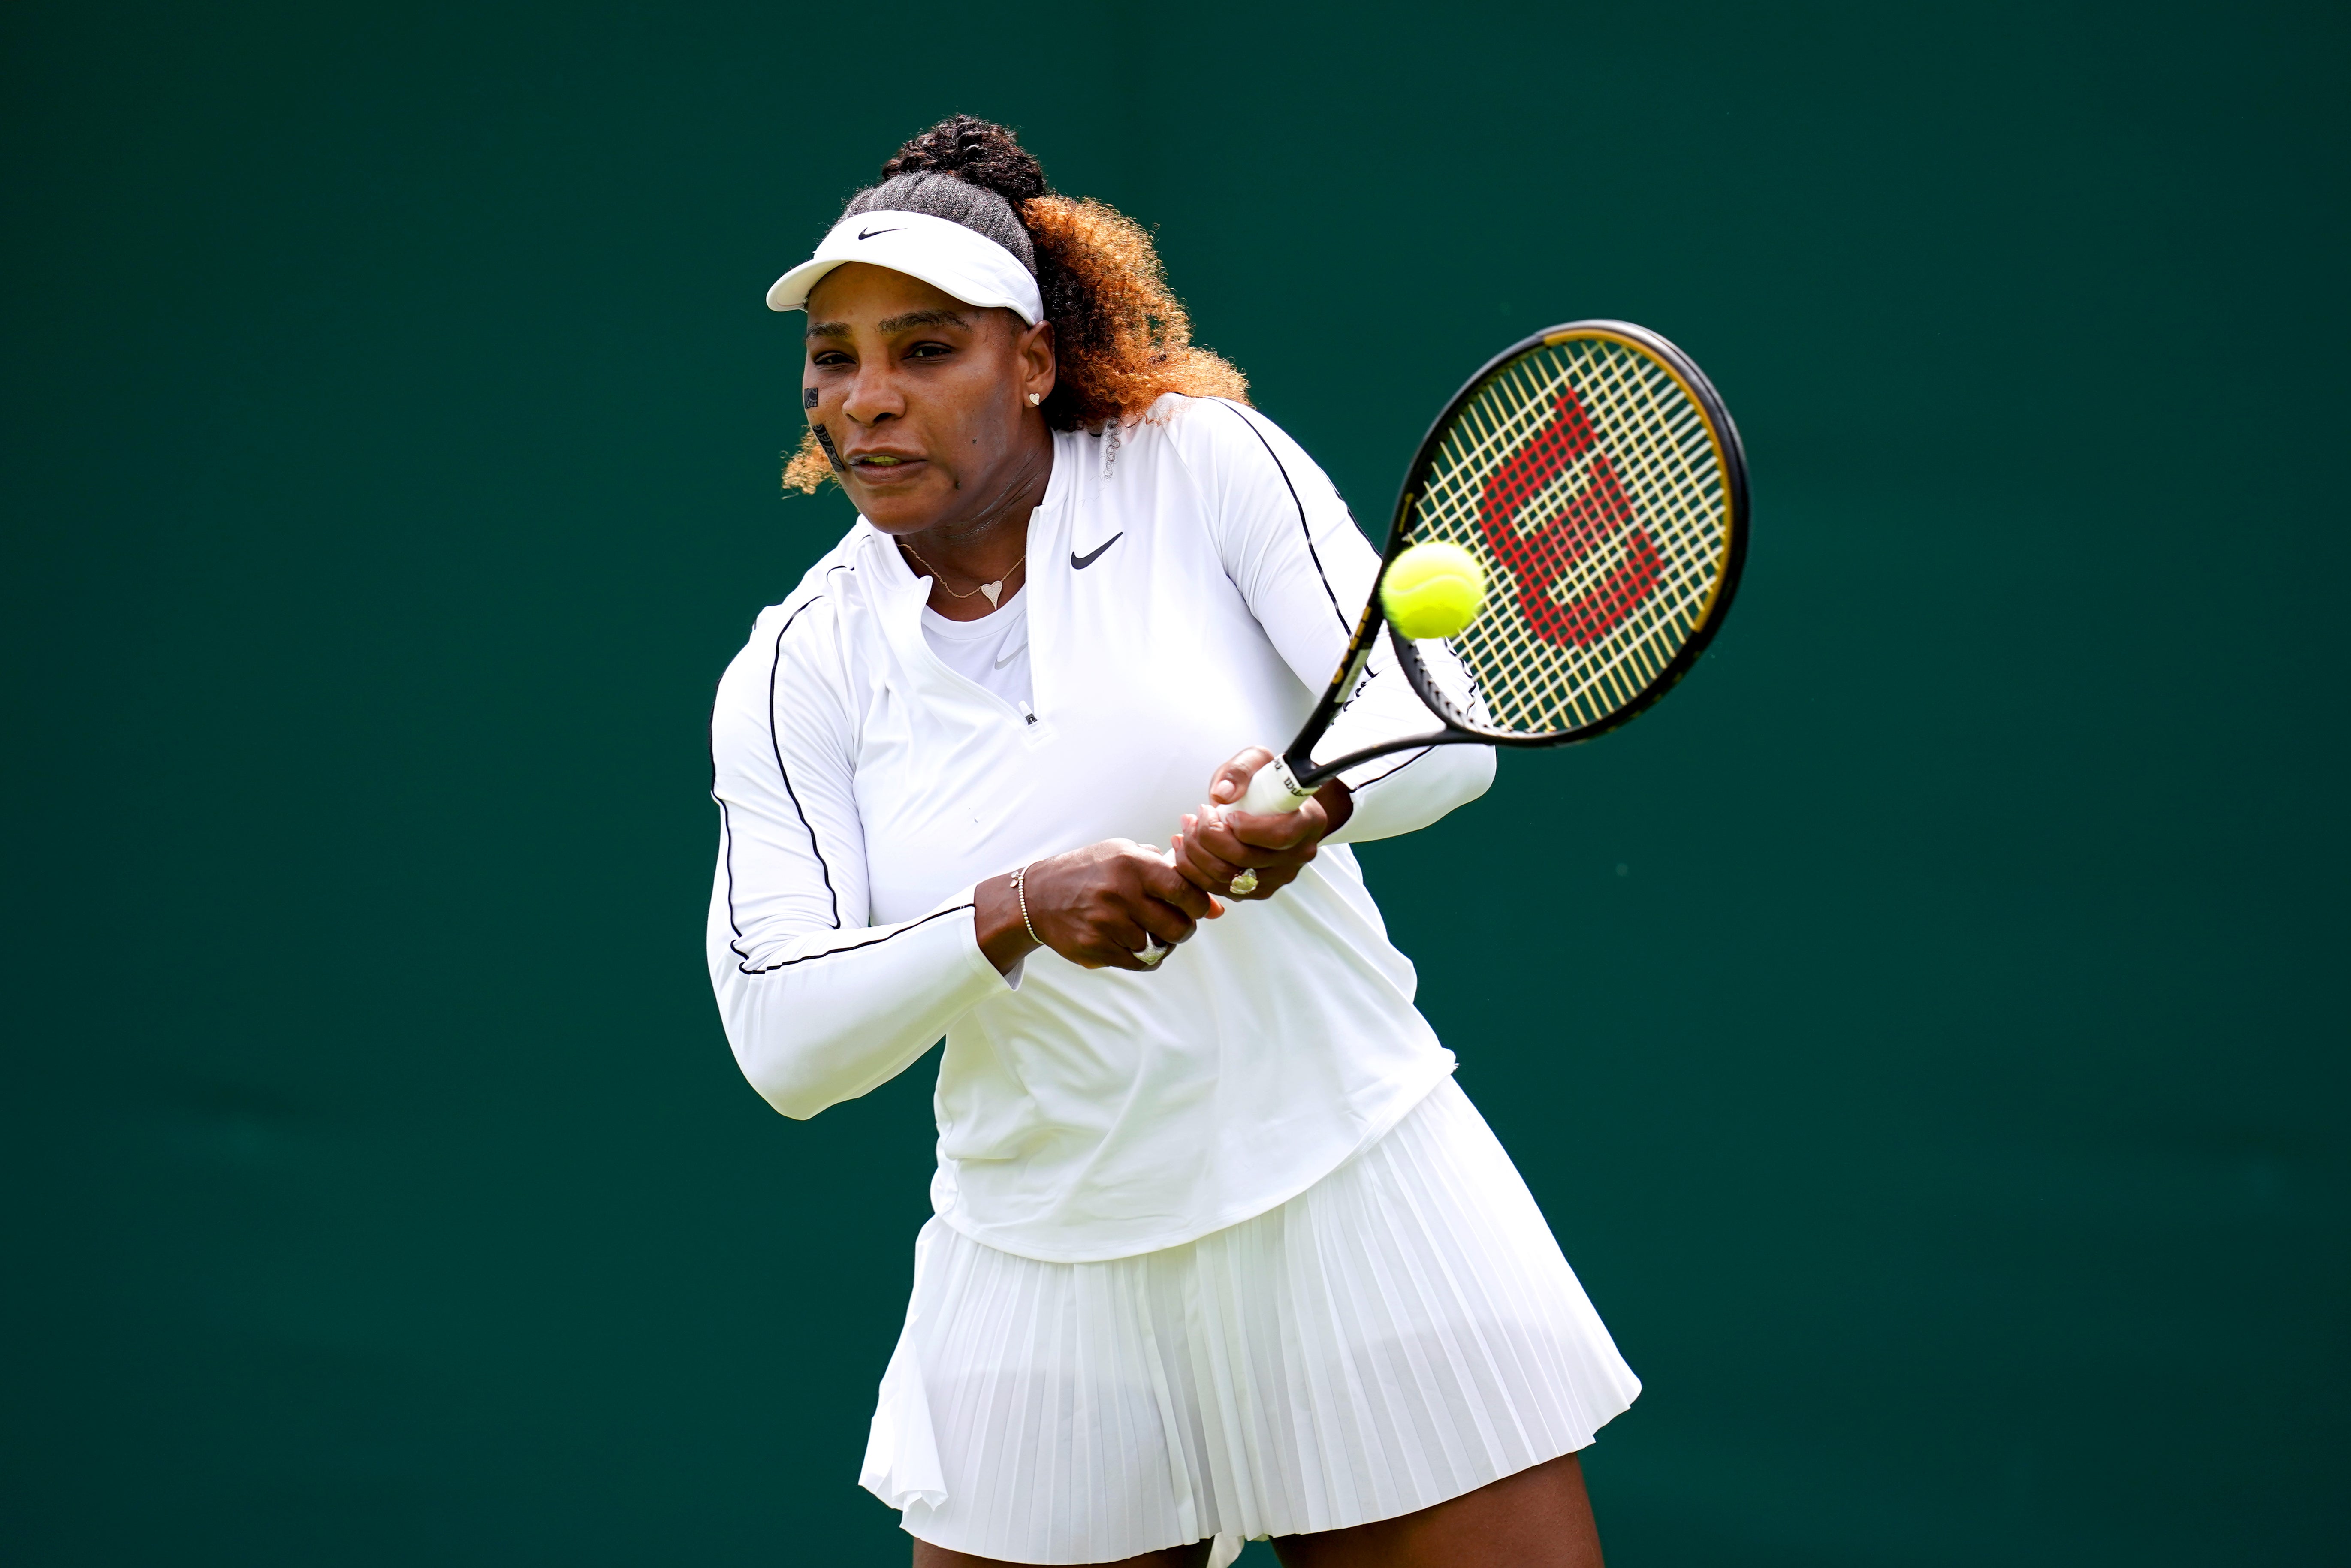 Wimbledon Players: Who are the top players in this year's championship?